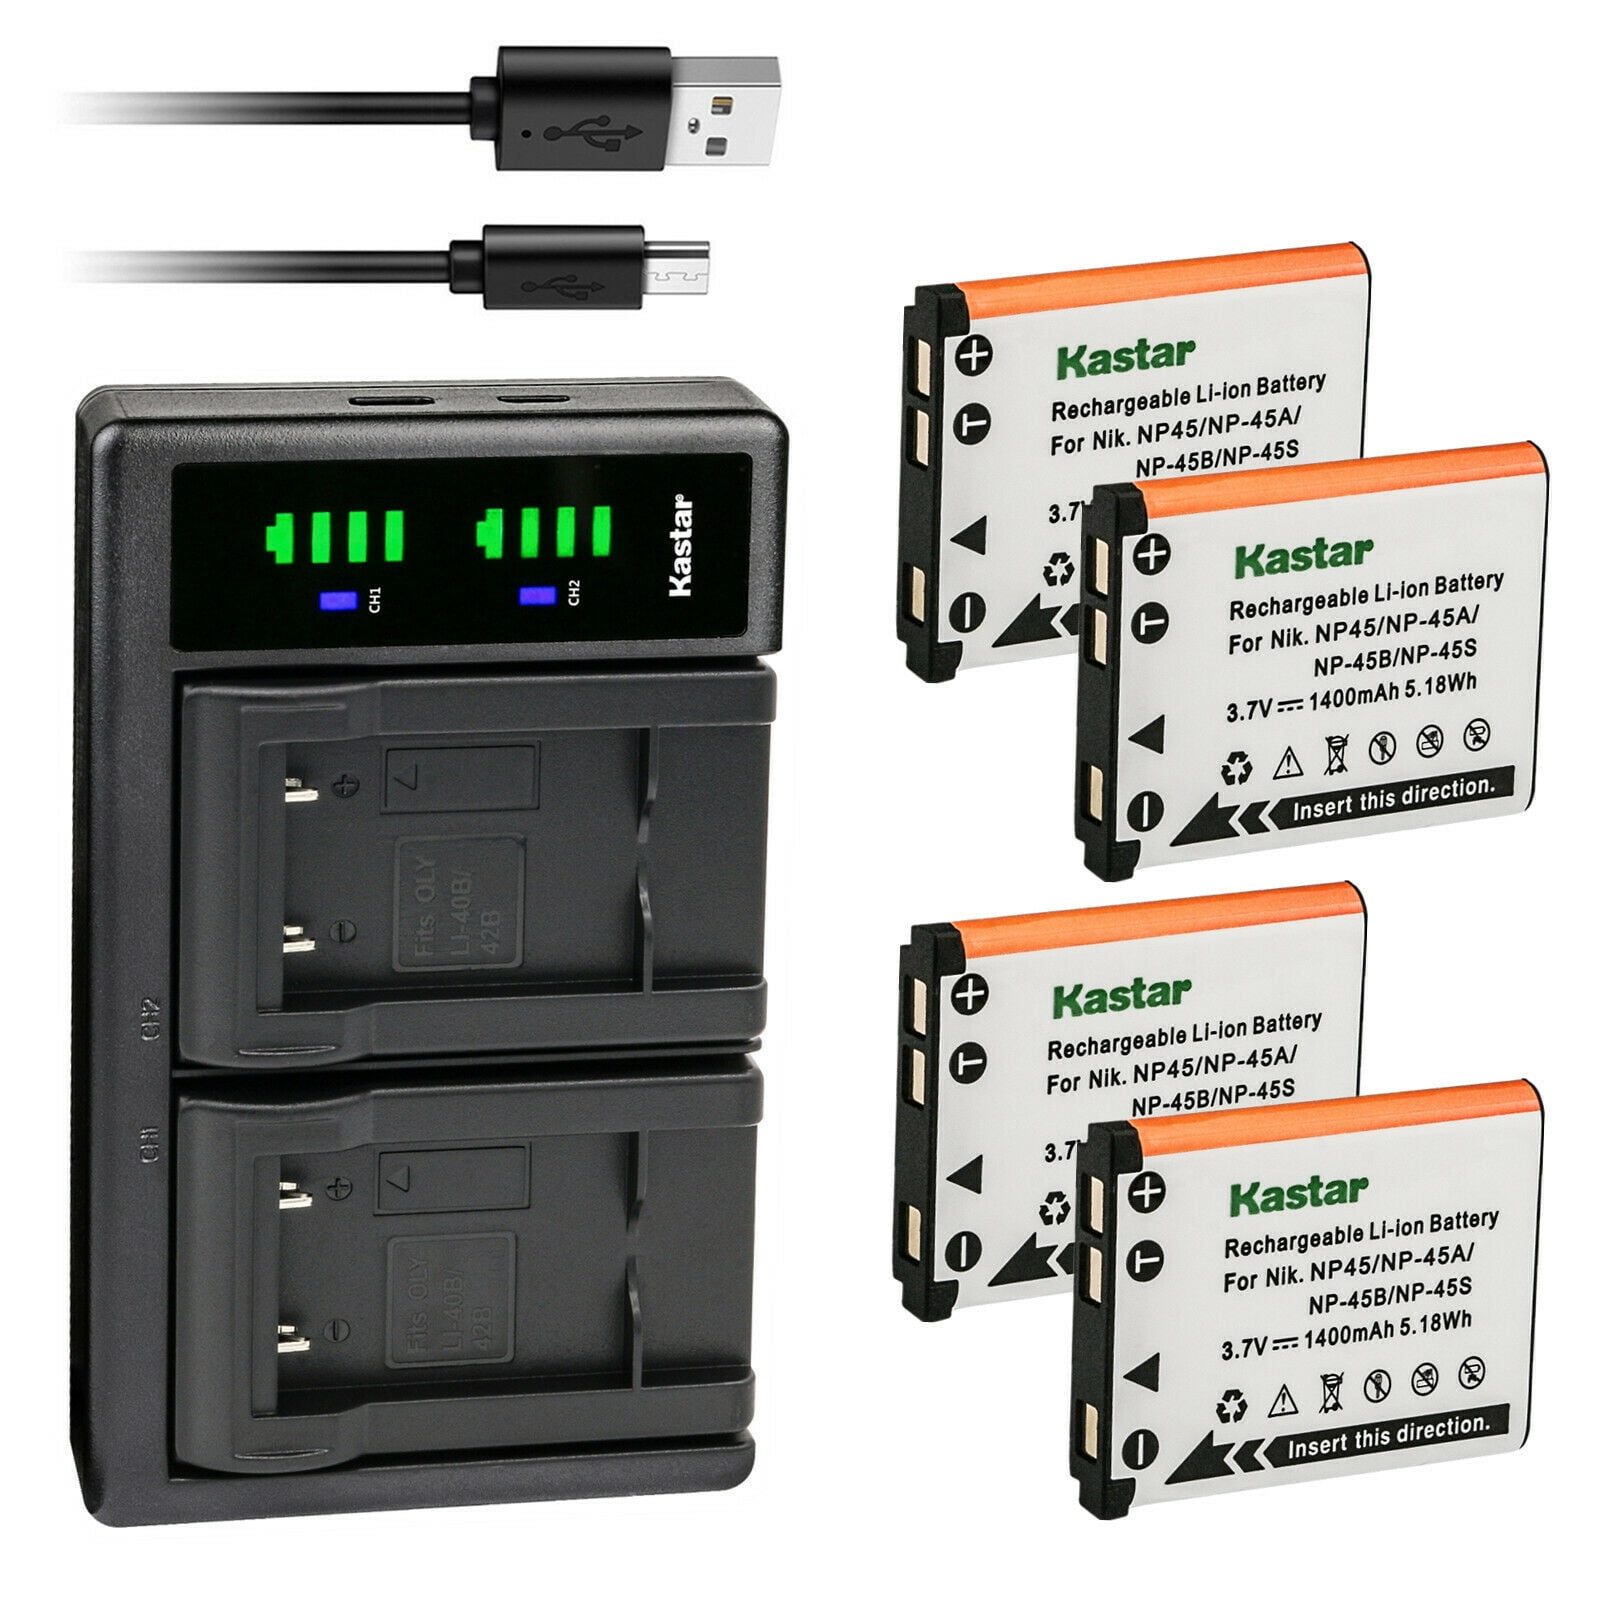 Kastar 1-Pack Battery and USB Charger Compatible Fujifilm NP-45S, Fujifilm FinePix L30 FinePix L50 FinePix L55 FinePix L90 FinePix T200 FinePix T205 FinePix T300 FinePix T305 - Walmart.com